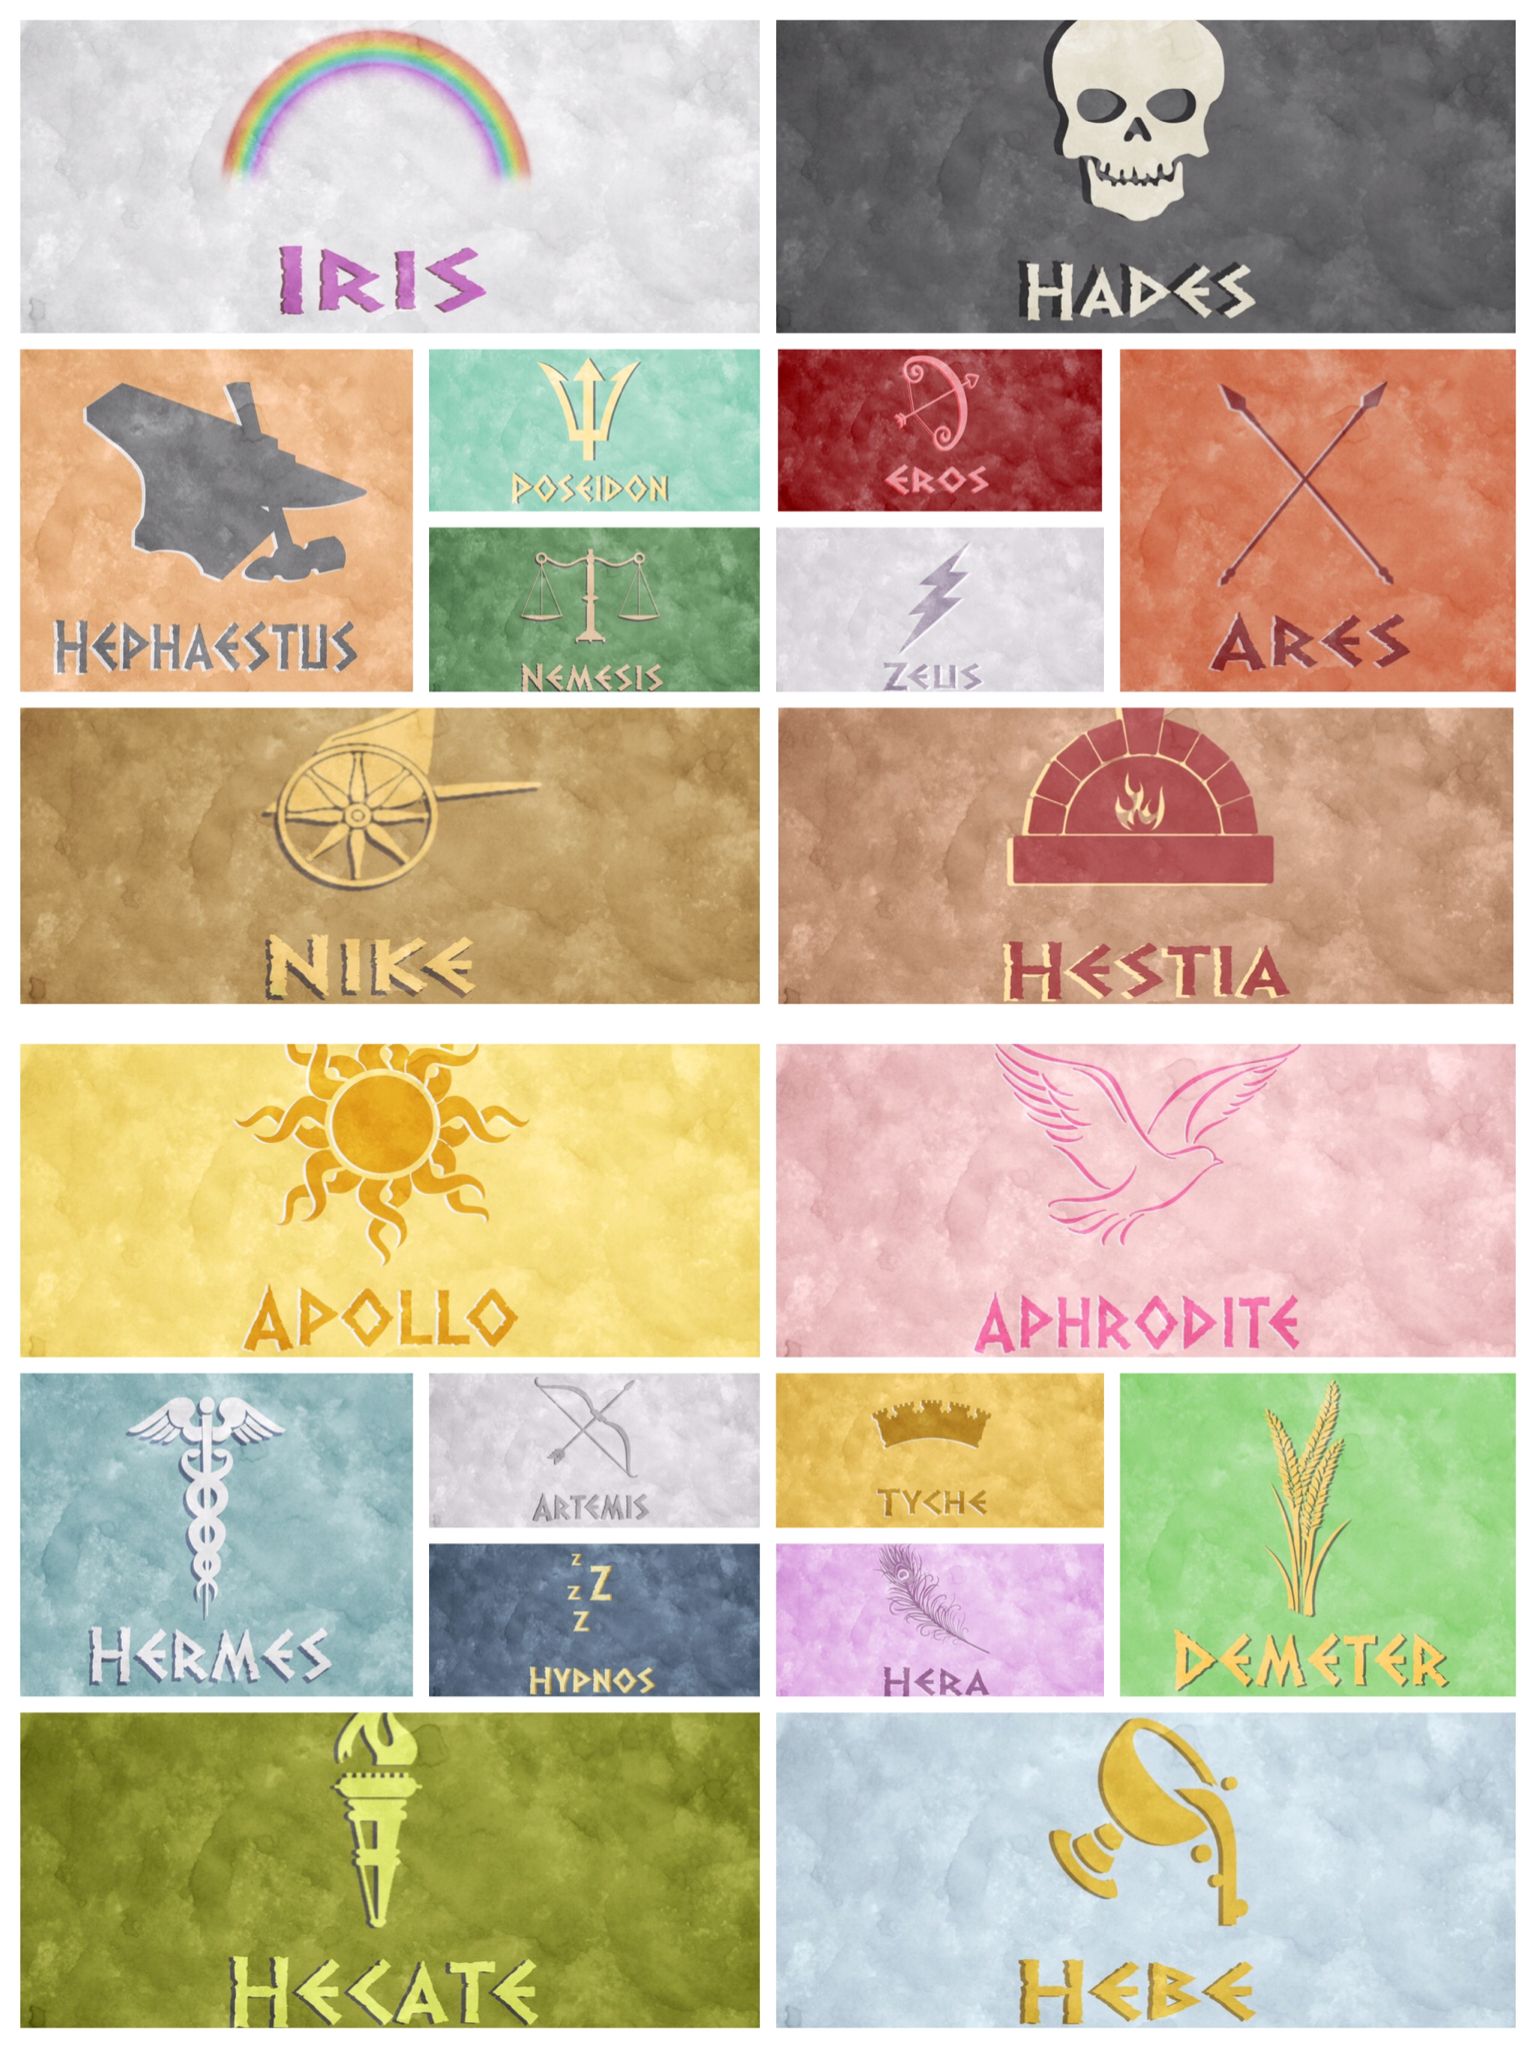 Percy Jackson/ Heroes of Olympus/ The Trials of Apollo